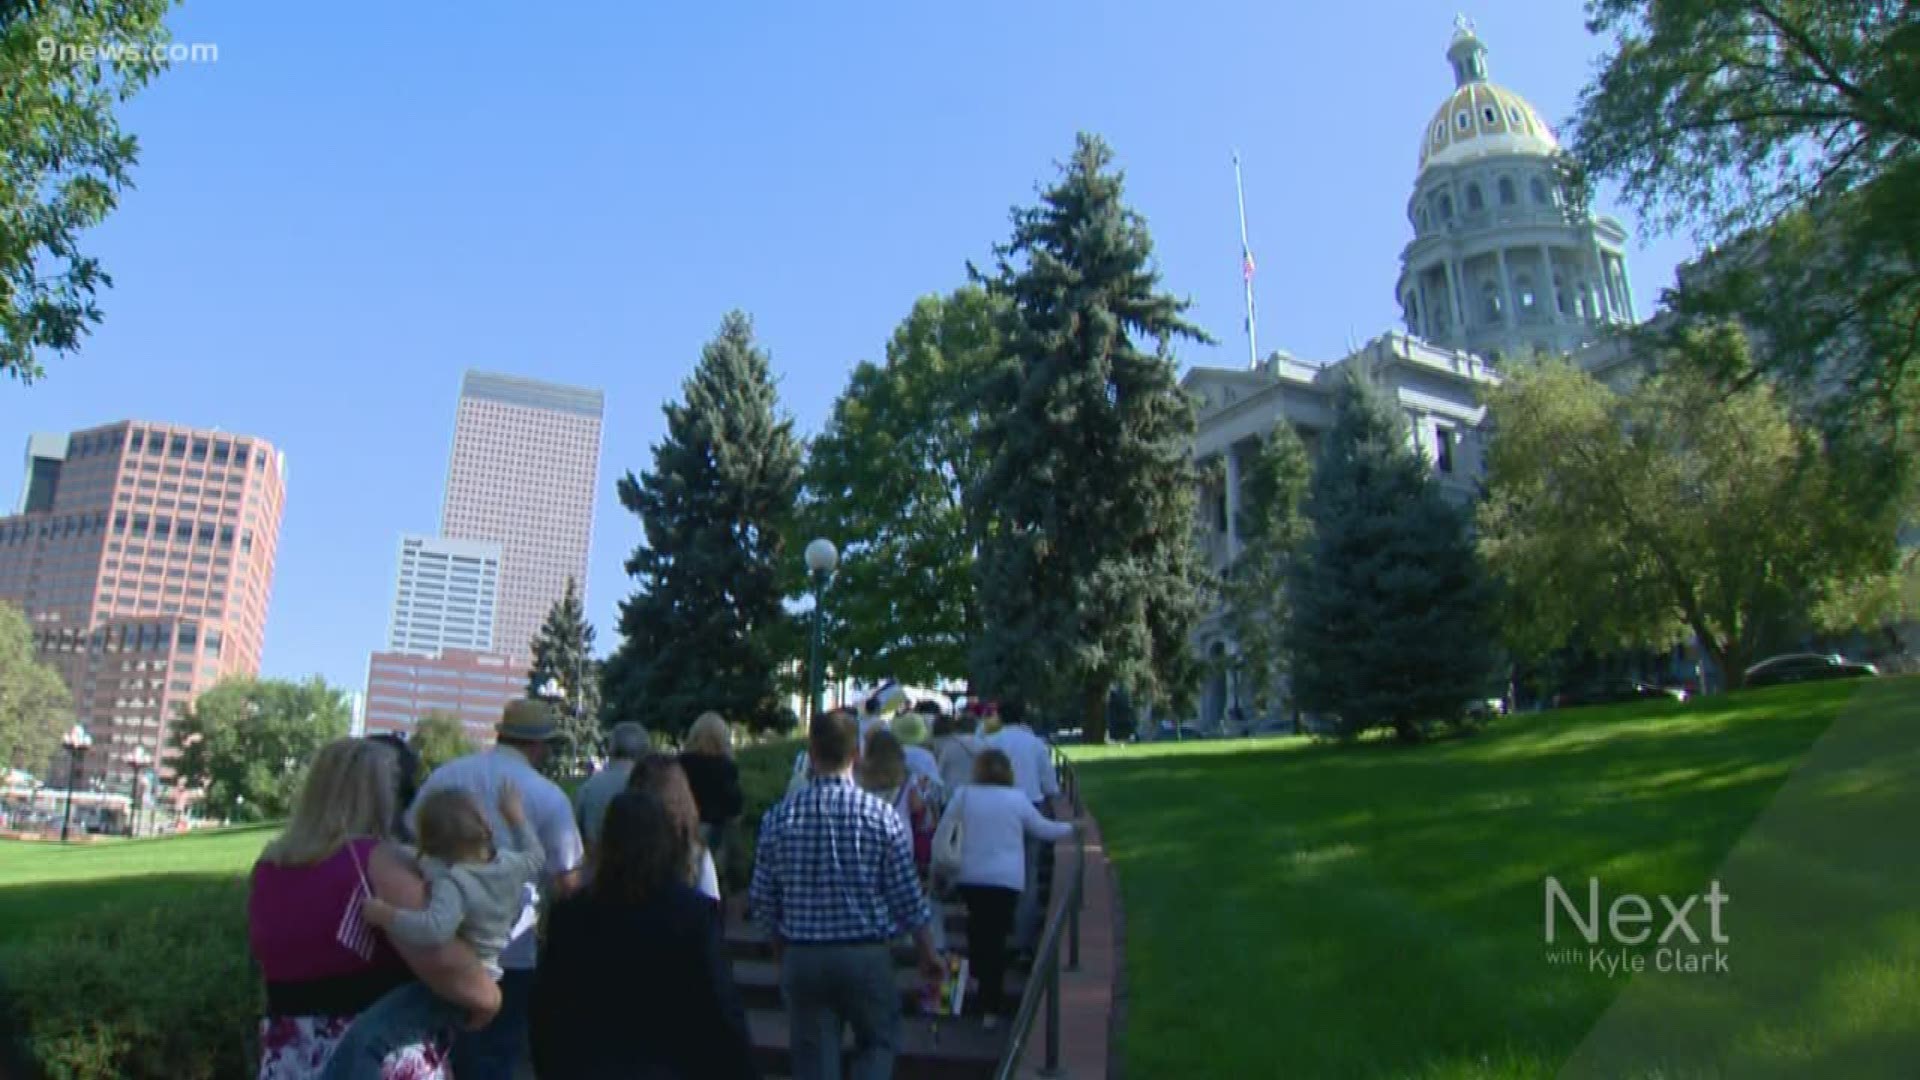 Politicians and community leaders gathered on the steps of Colorado's Capitol to celebrate Colorado Women’s Equality Day. Monday marked the 99th anniversary of the largest voting-rights expansion in American history - the passing of the 19th Amendment, which guaranteed full voting rights to women across the country in 1920.